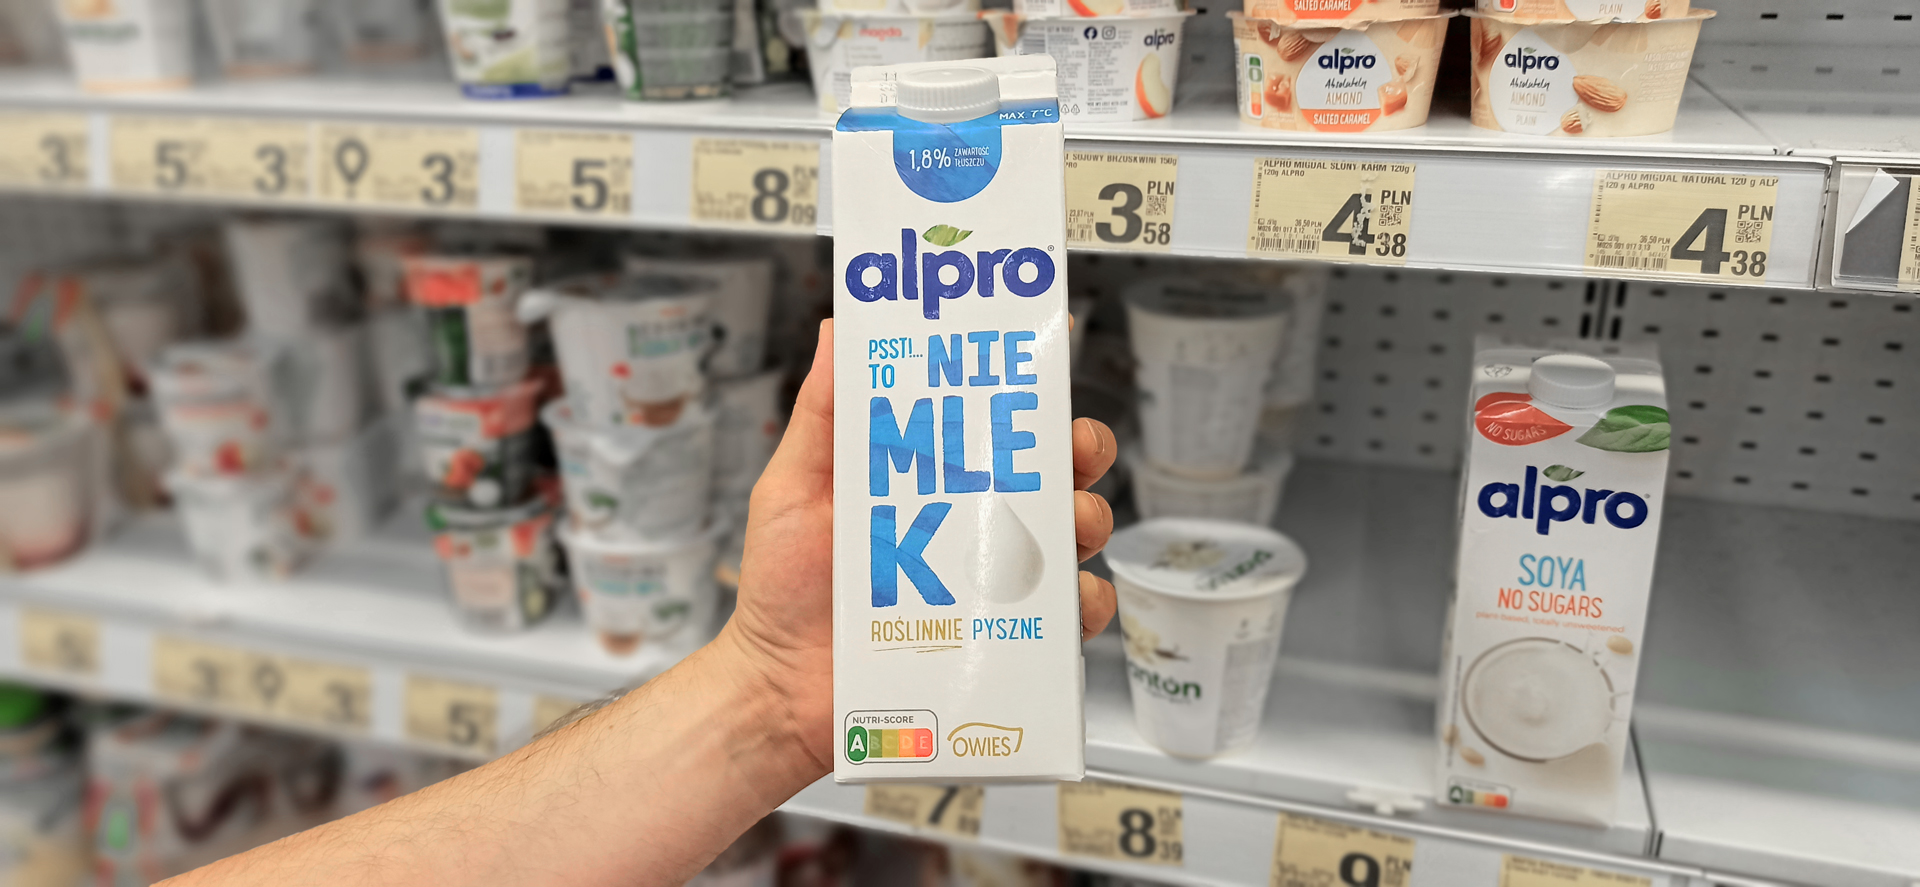 Alpro plant-based milk packaging held by one hand and supermarket shelves in the background